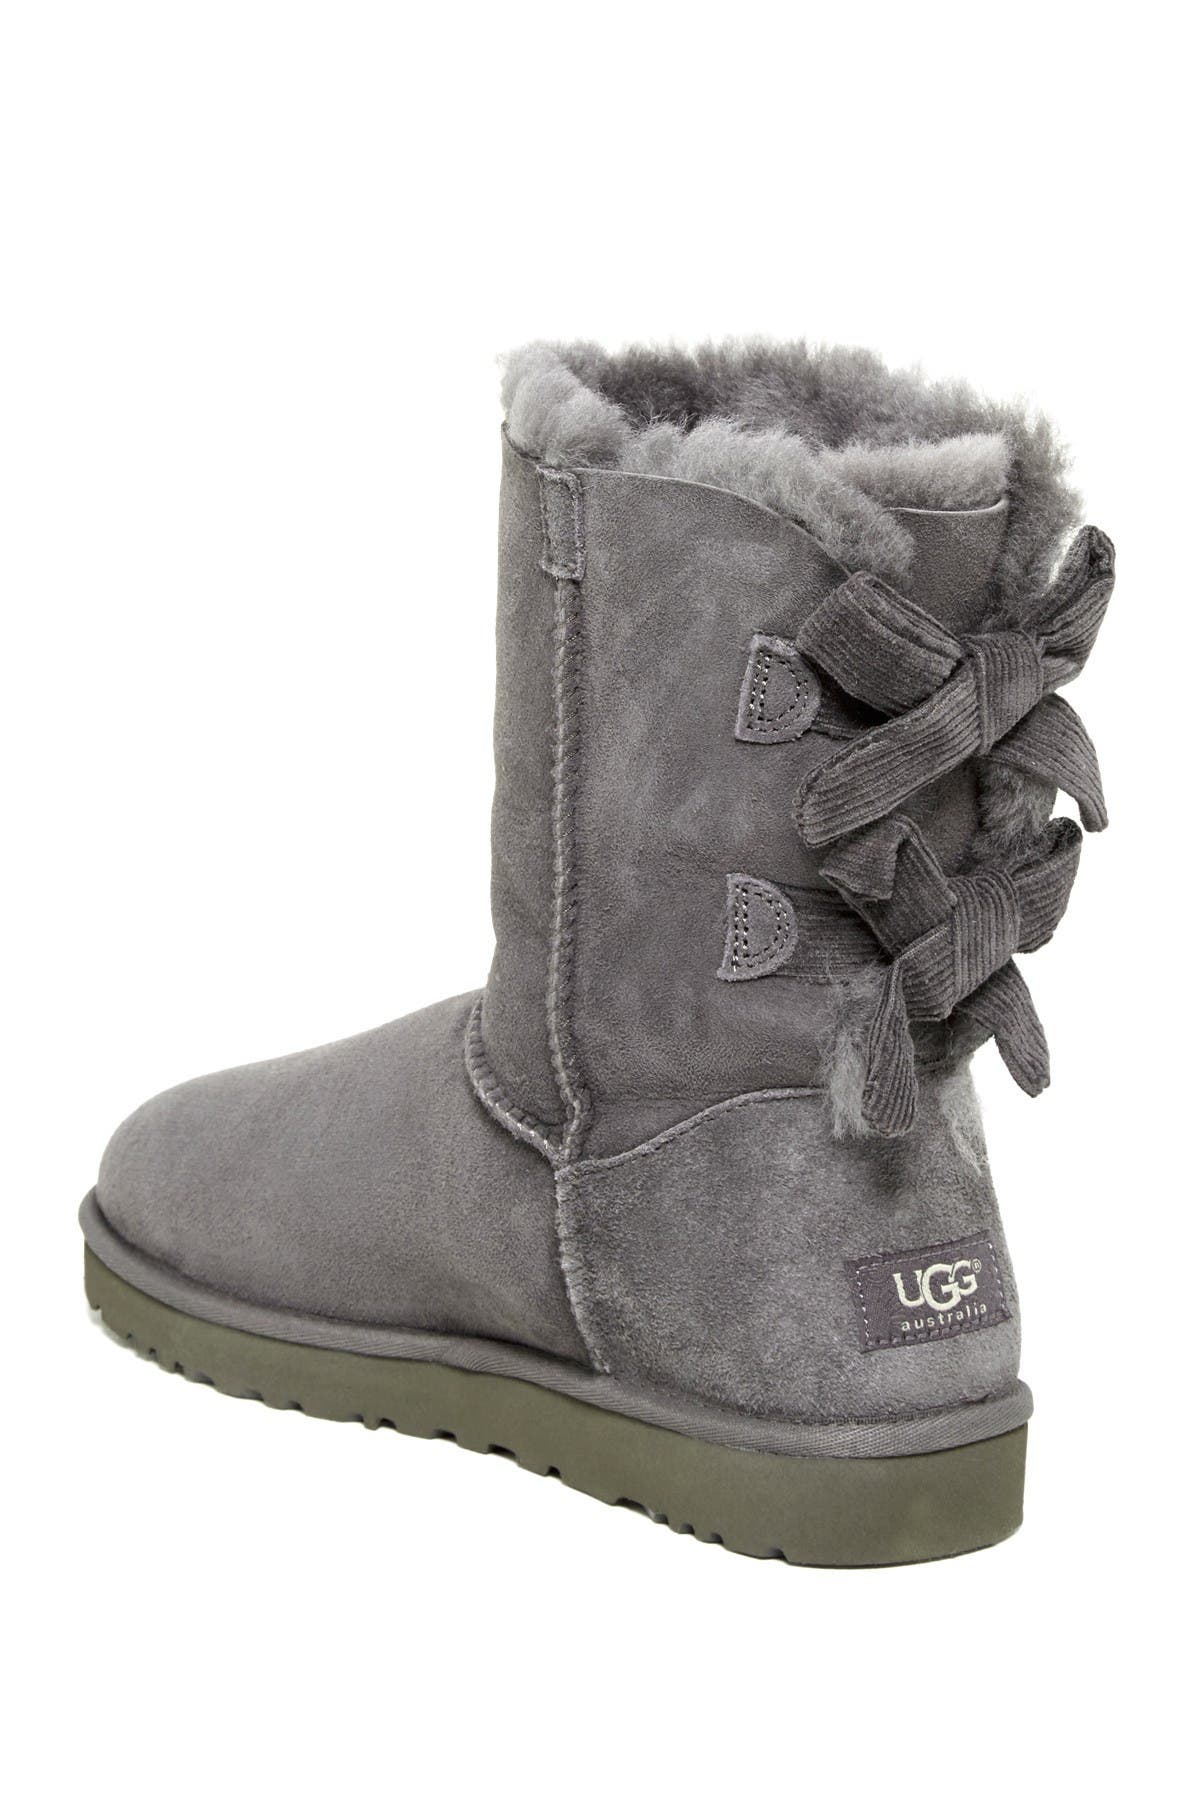 sweater uggs with bows